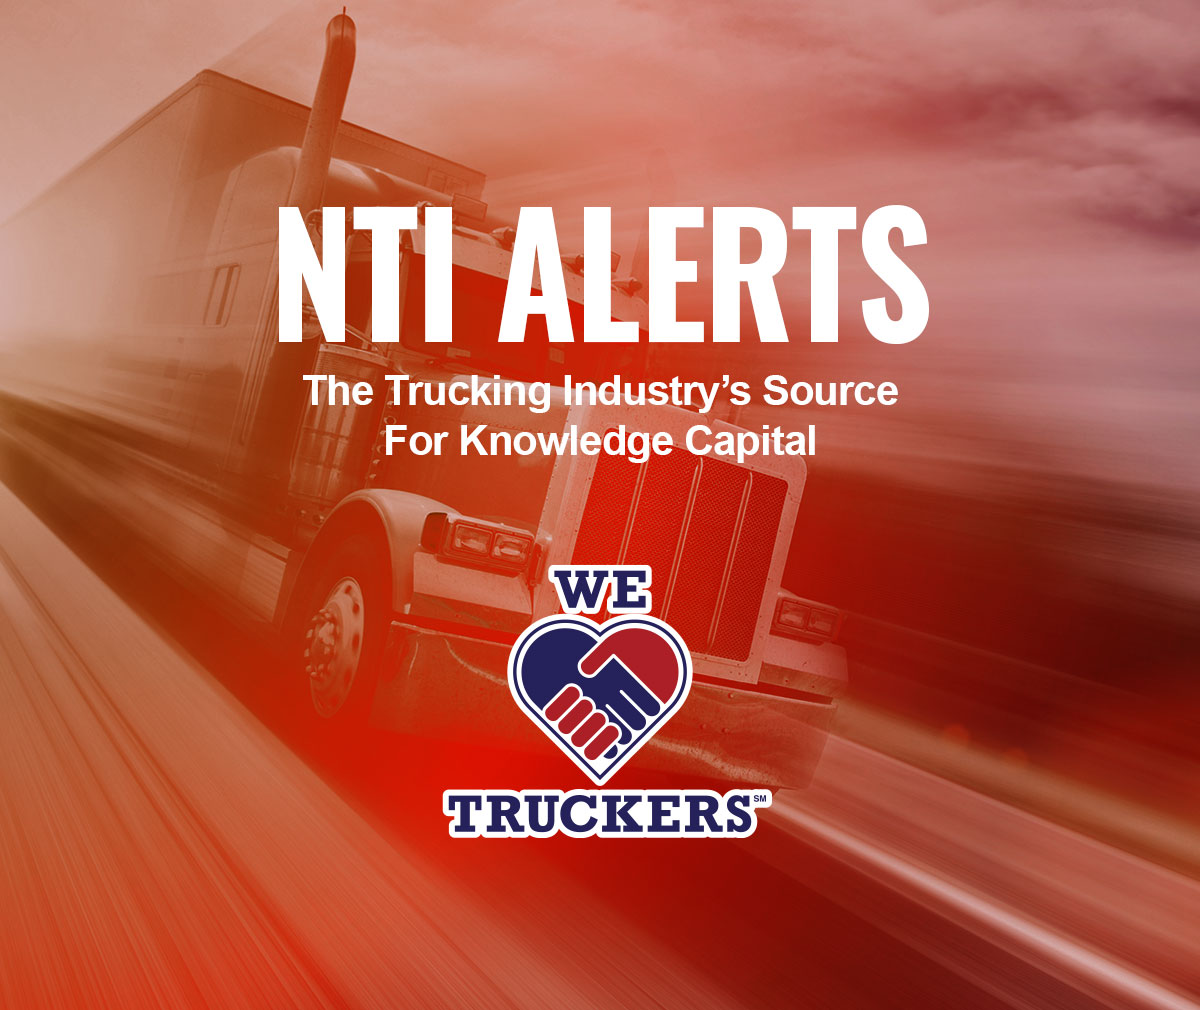 NTI Alerts - The Trucking Industry’s Source for Knowledge Capital